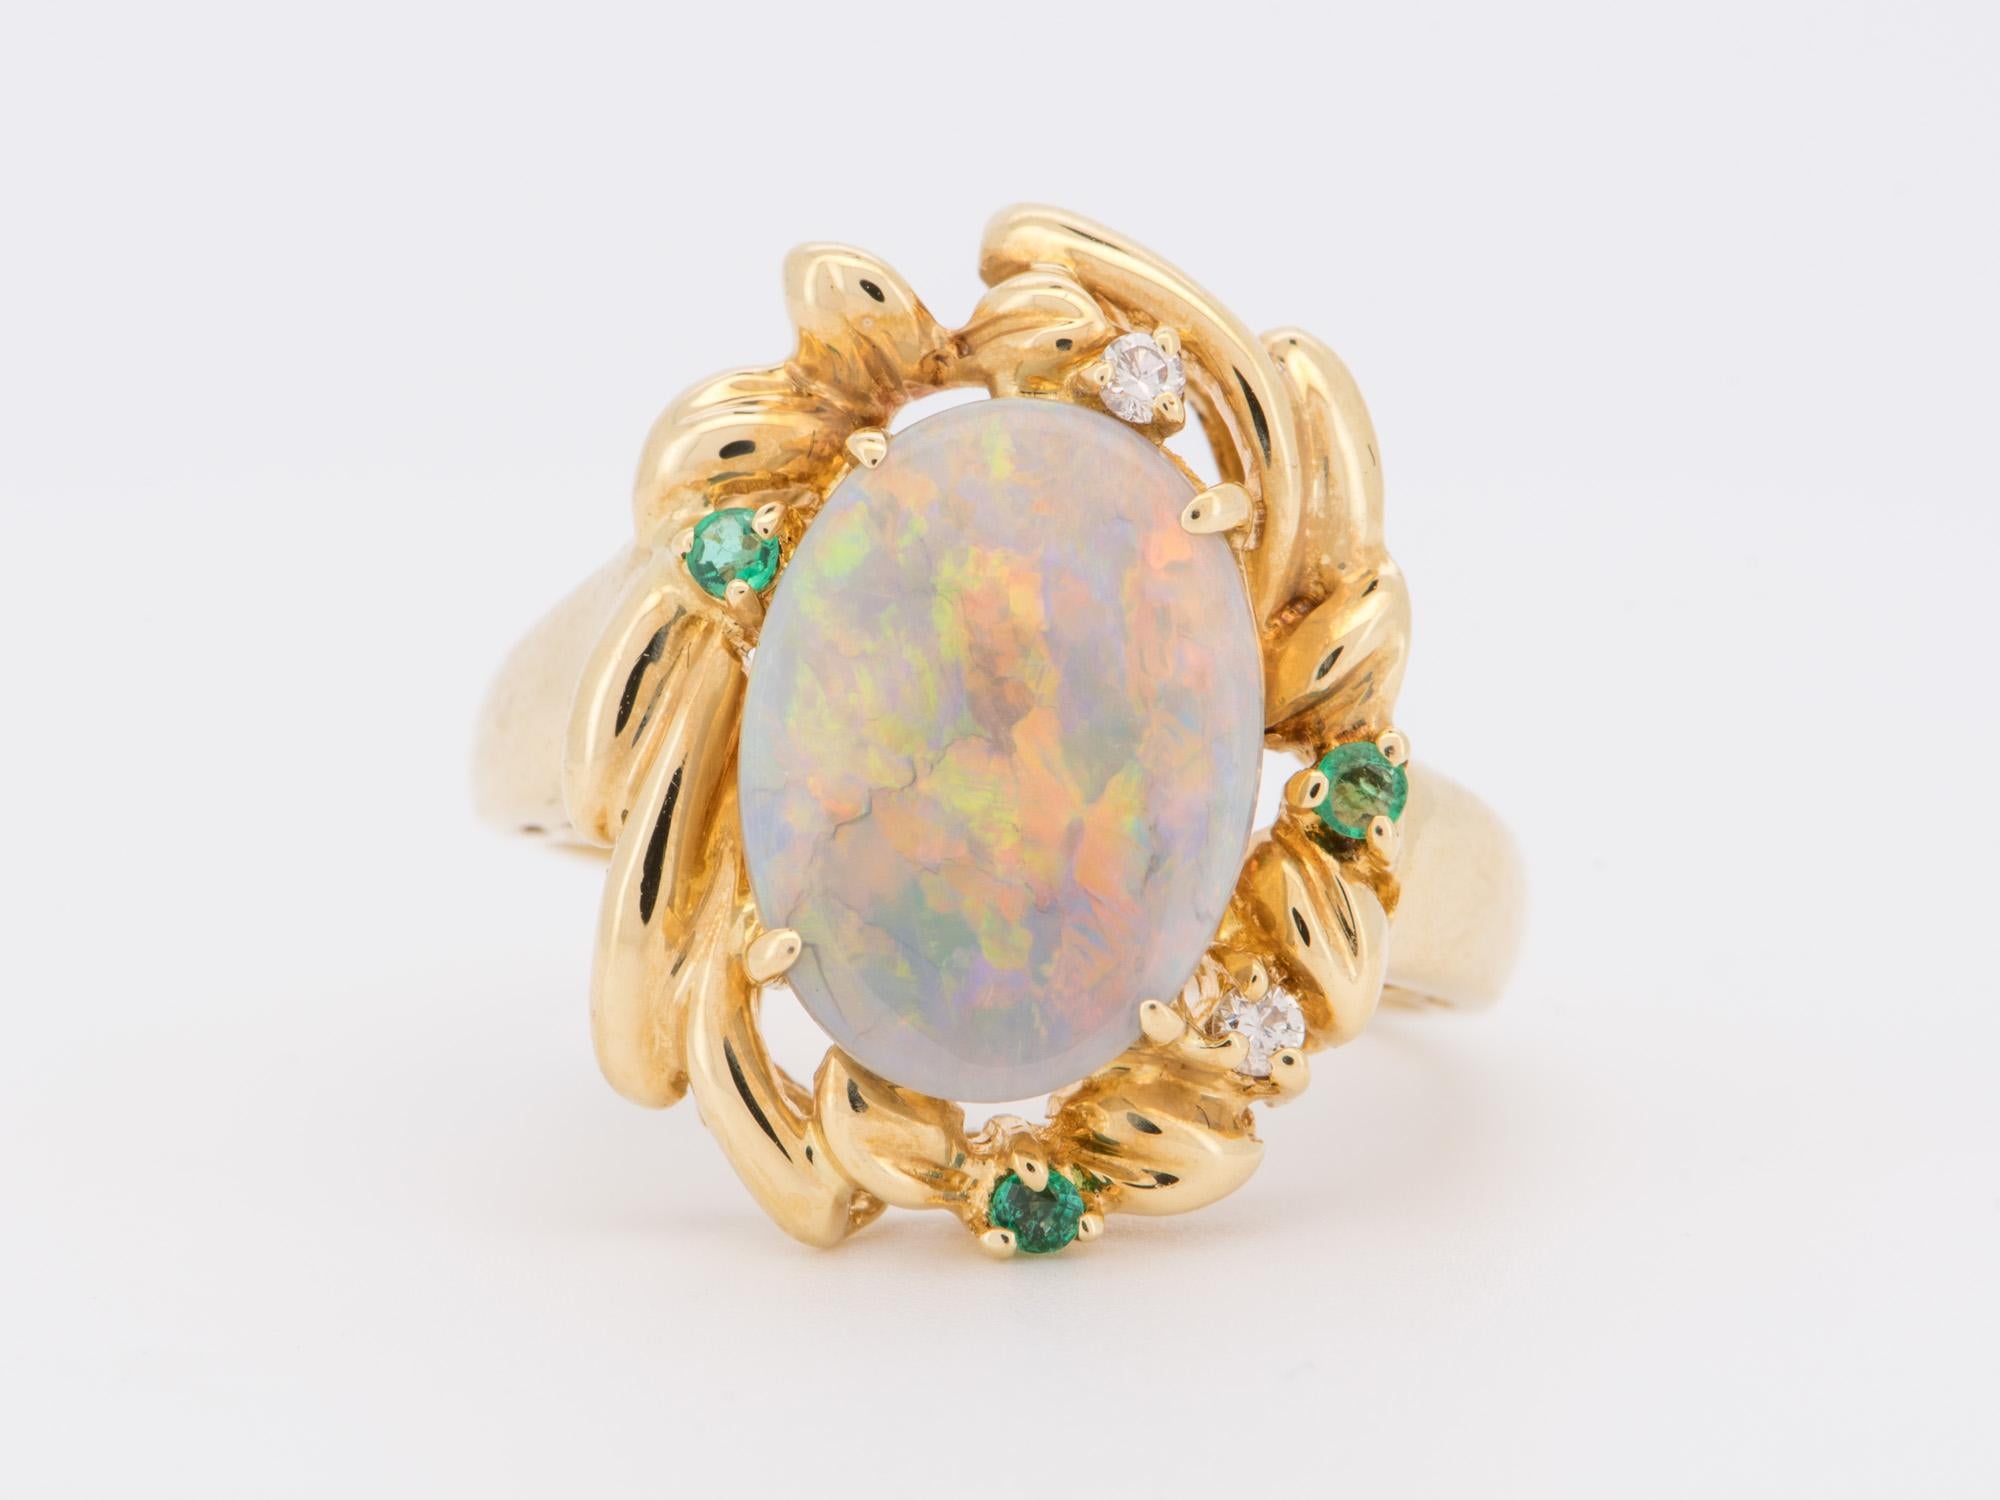 ♥ Solid Australian Opal Ring 18K Gold
♥ The face of the ring measures 14.8mm in width (East West direction), 18.7mm in length (North South direction), and sits 6.3mm tall from the finger. The band is 1.7mm wide.

♥ US size 5.75 (Free resizing up or